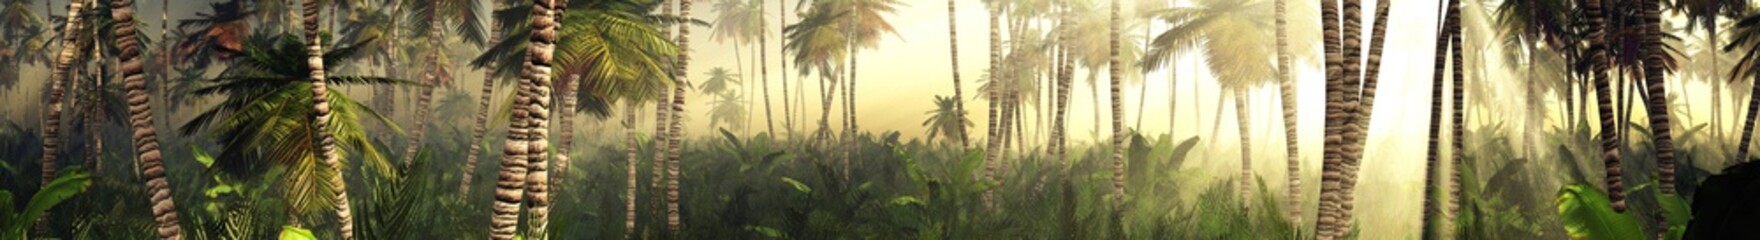 Panorama of the jungle in the morning in the rays of the rising sun, palm trees in the fog in the morning, 3D rendering